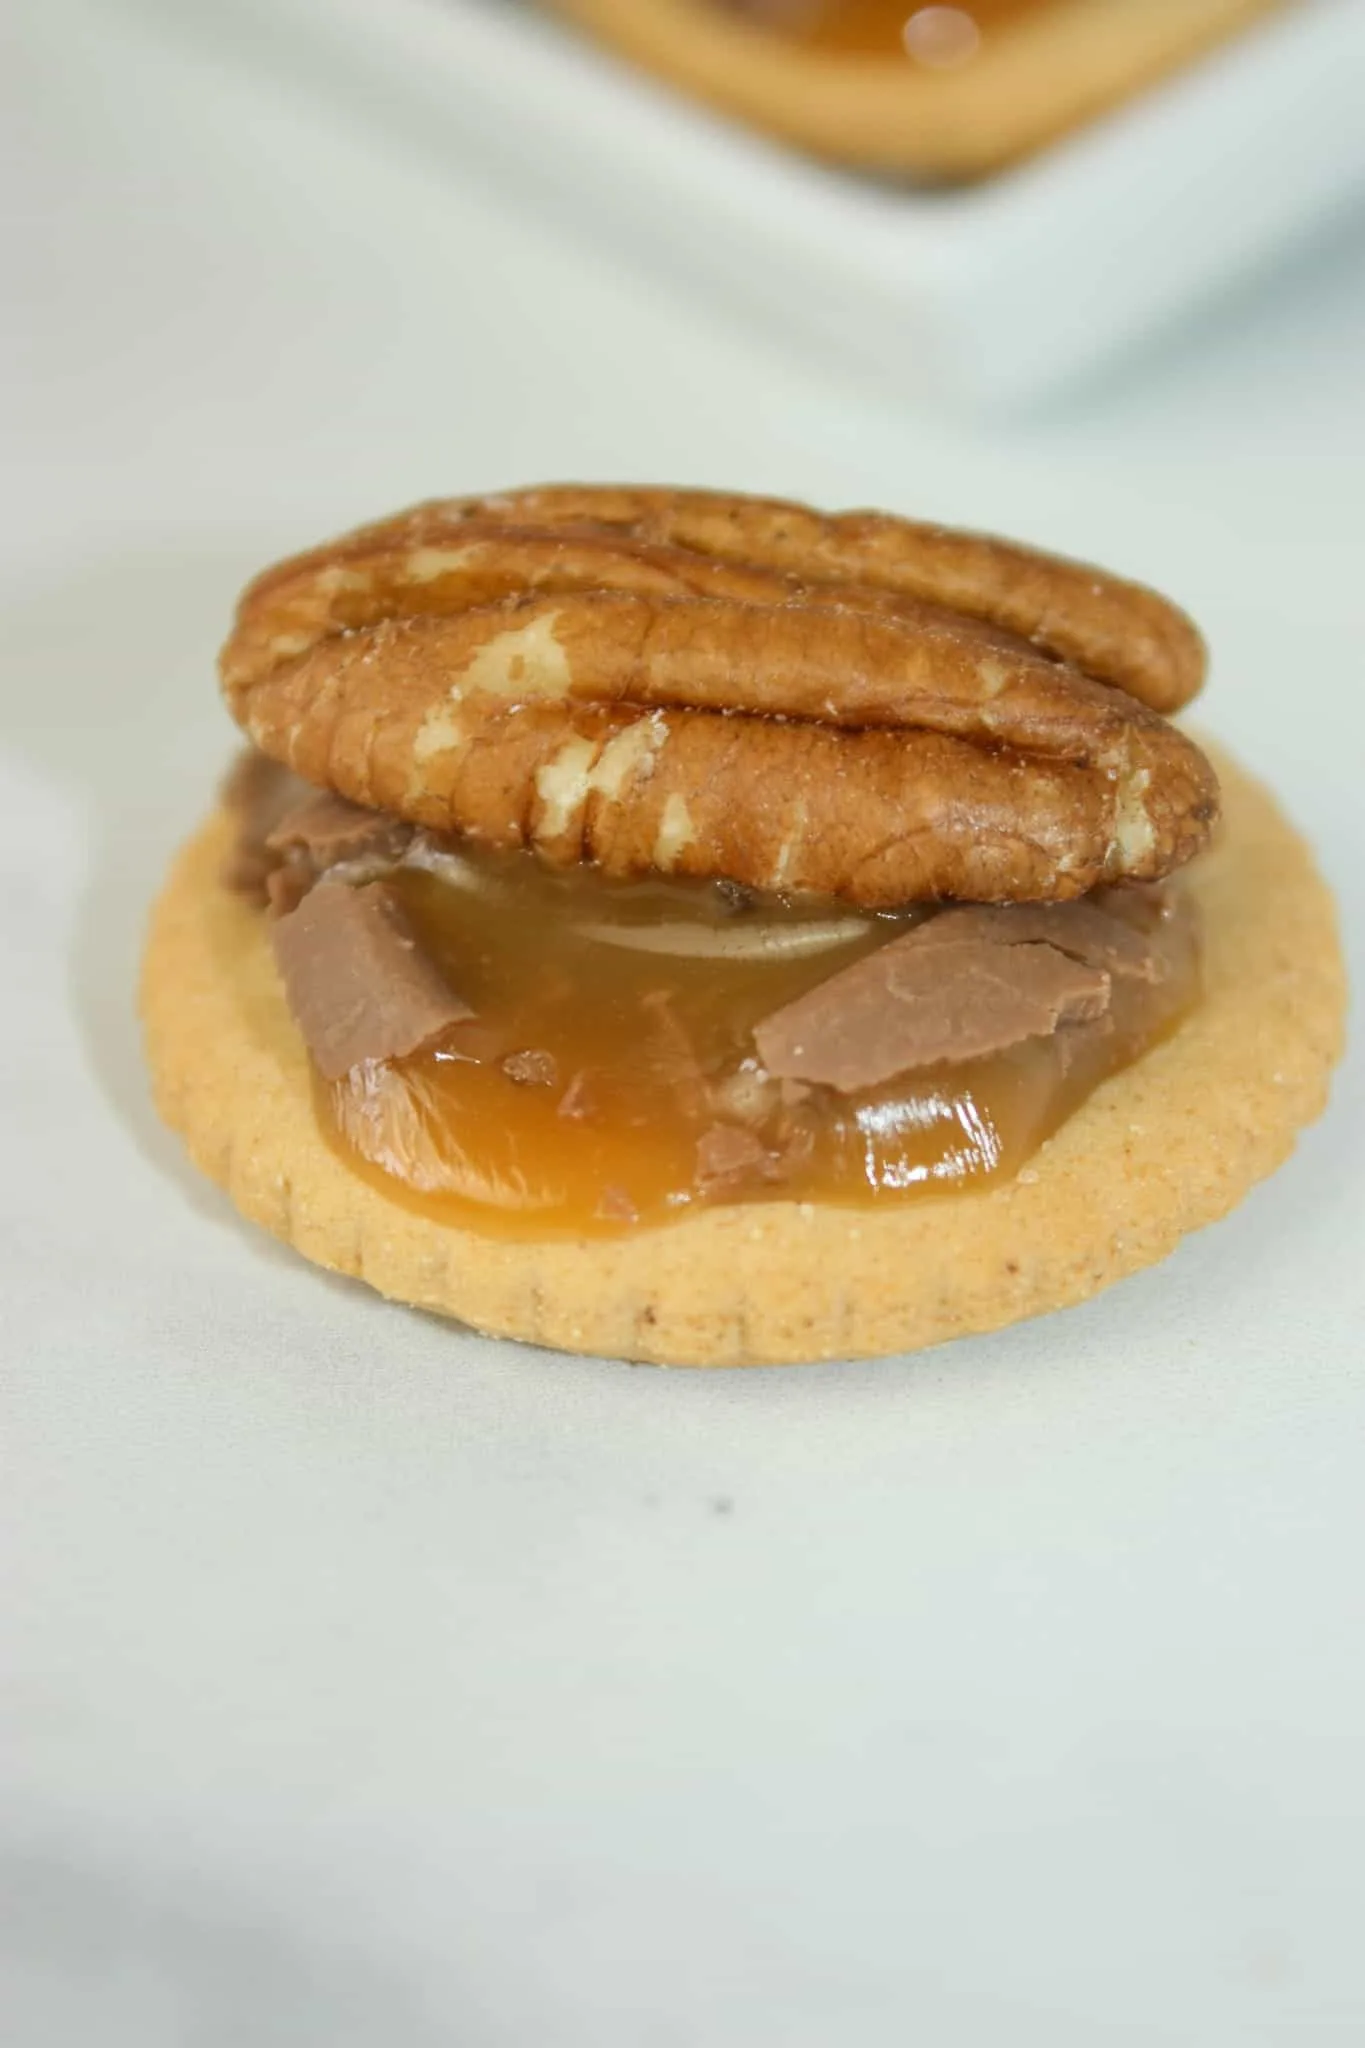 Gluten Free Rolo Turtles are a quick and easy dessert recipe that uses Schar Entertainment Crackers. These are the closest gluten free crackers to Ritz.